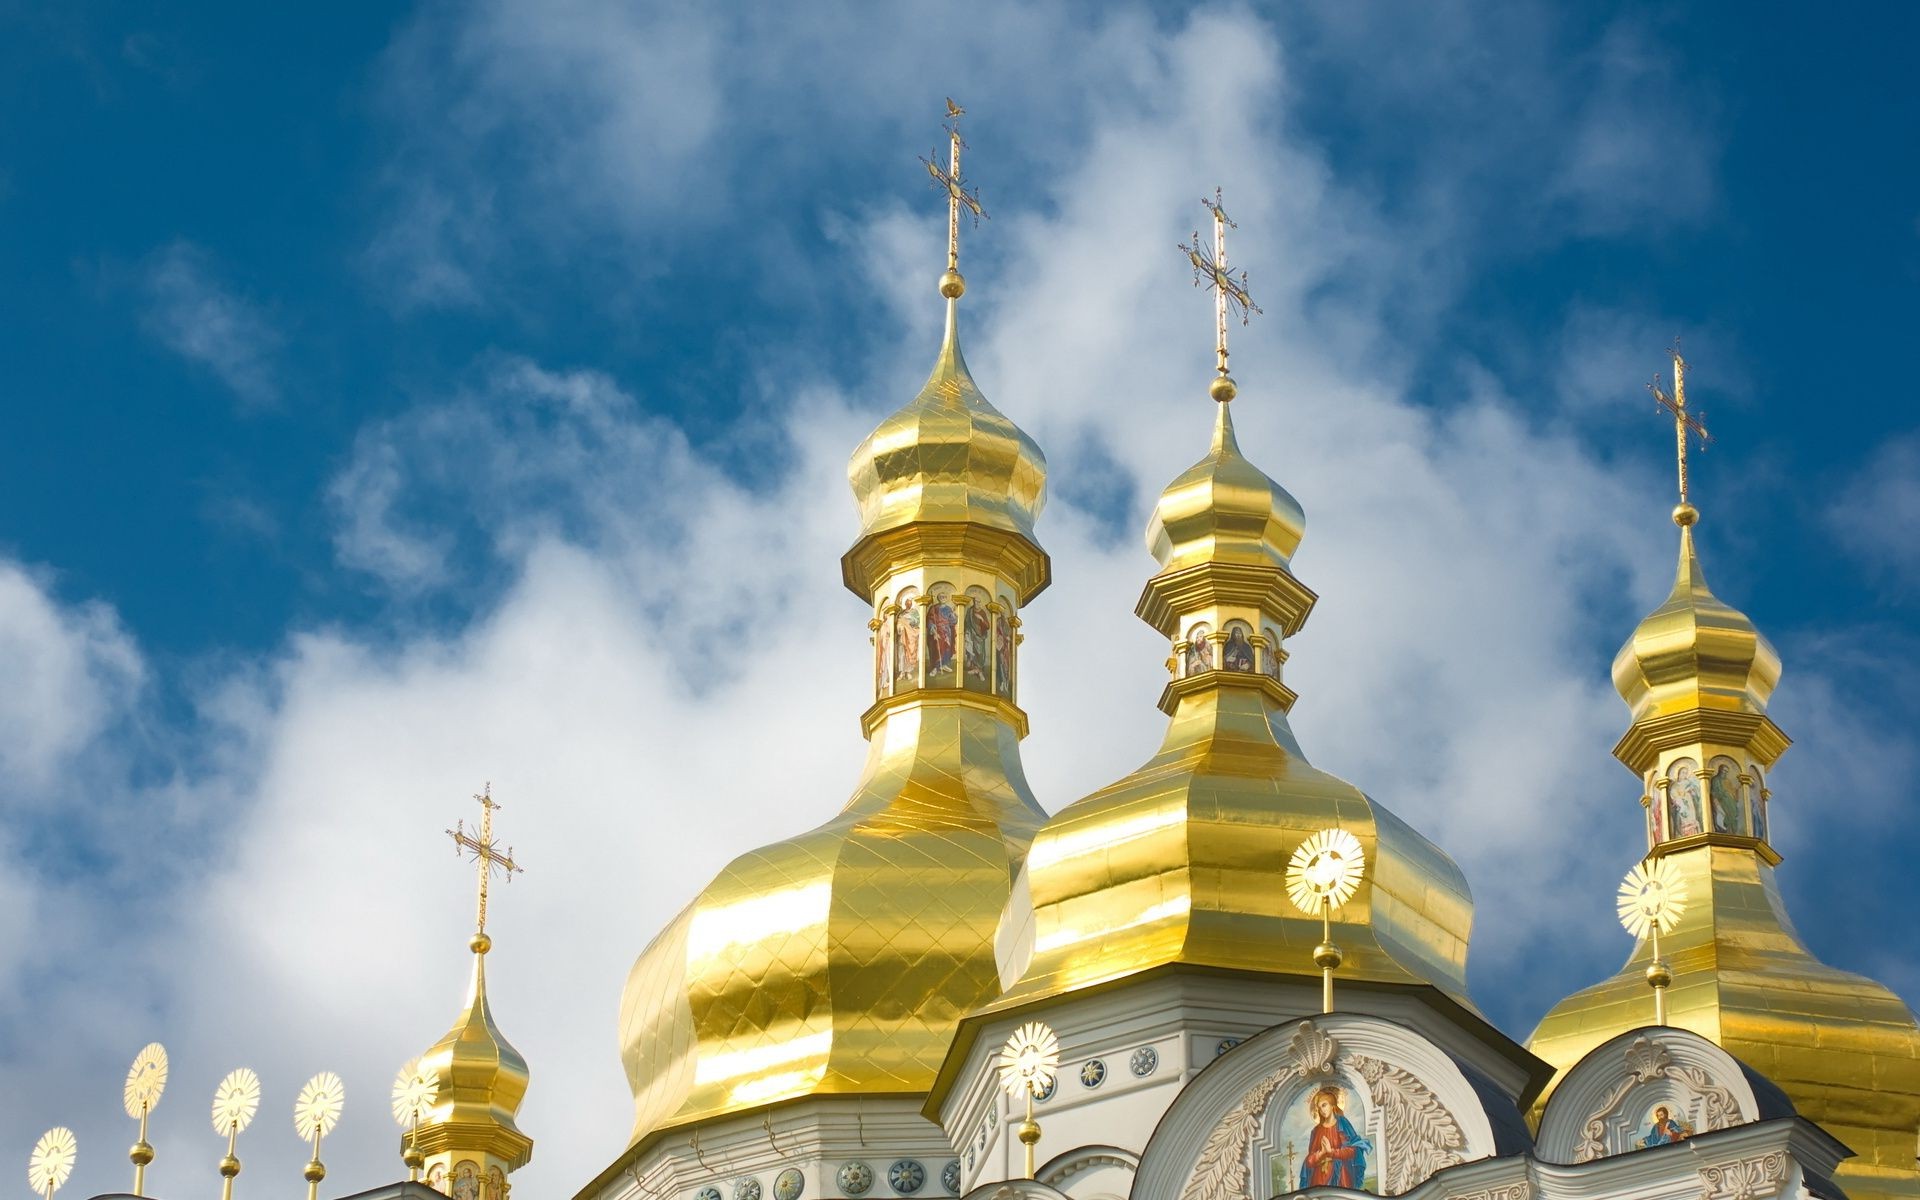 ancient architecture gold religion temple architecture orthodox traditional cross sacred spirituality monastery religious sky church dome travel ancient culture worship landmark old